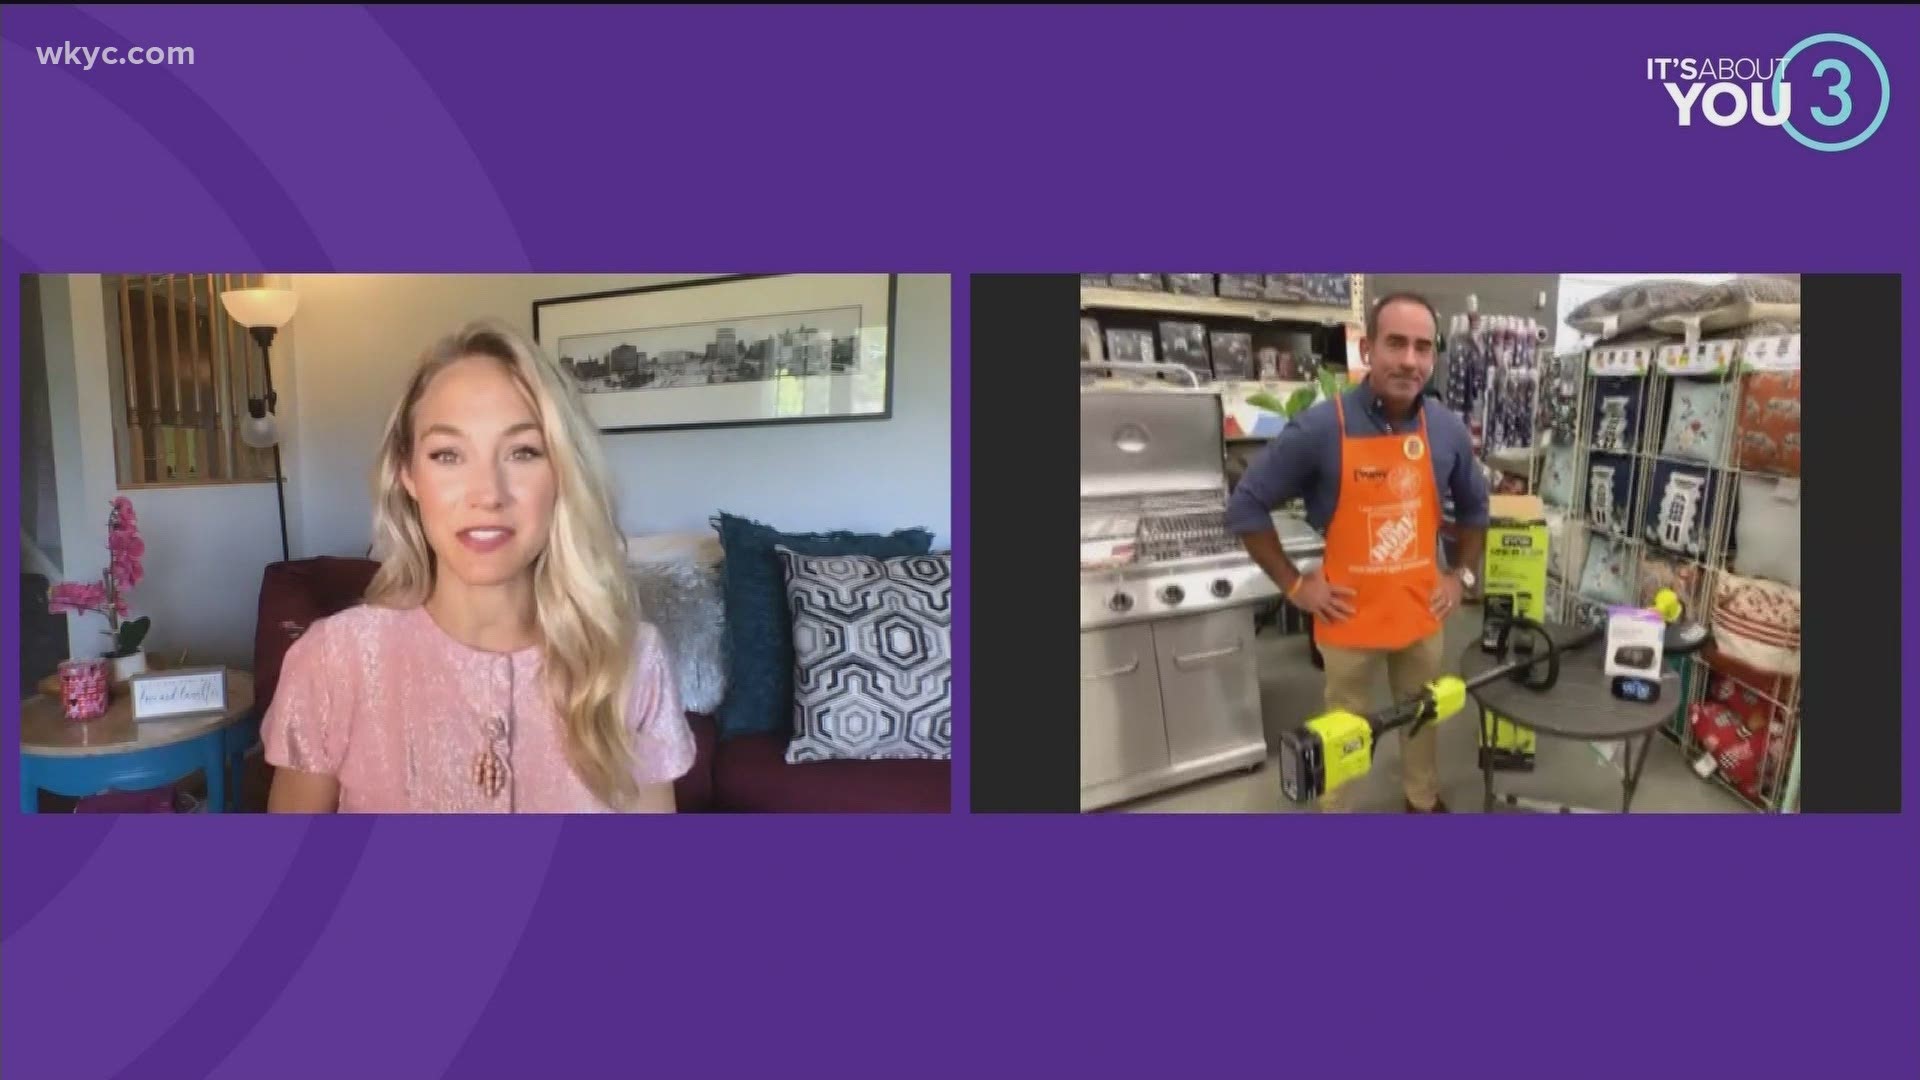 Father's Day is days away and if you need a last-minute gift... you're in luck! Alexa talks with Danny Watson, from Home Depot, about great ideas for fathers.